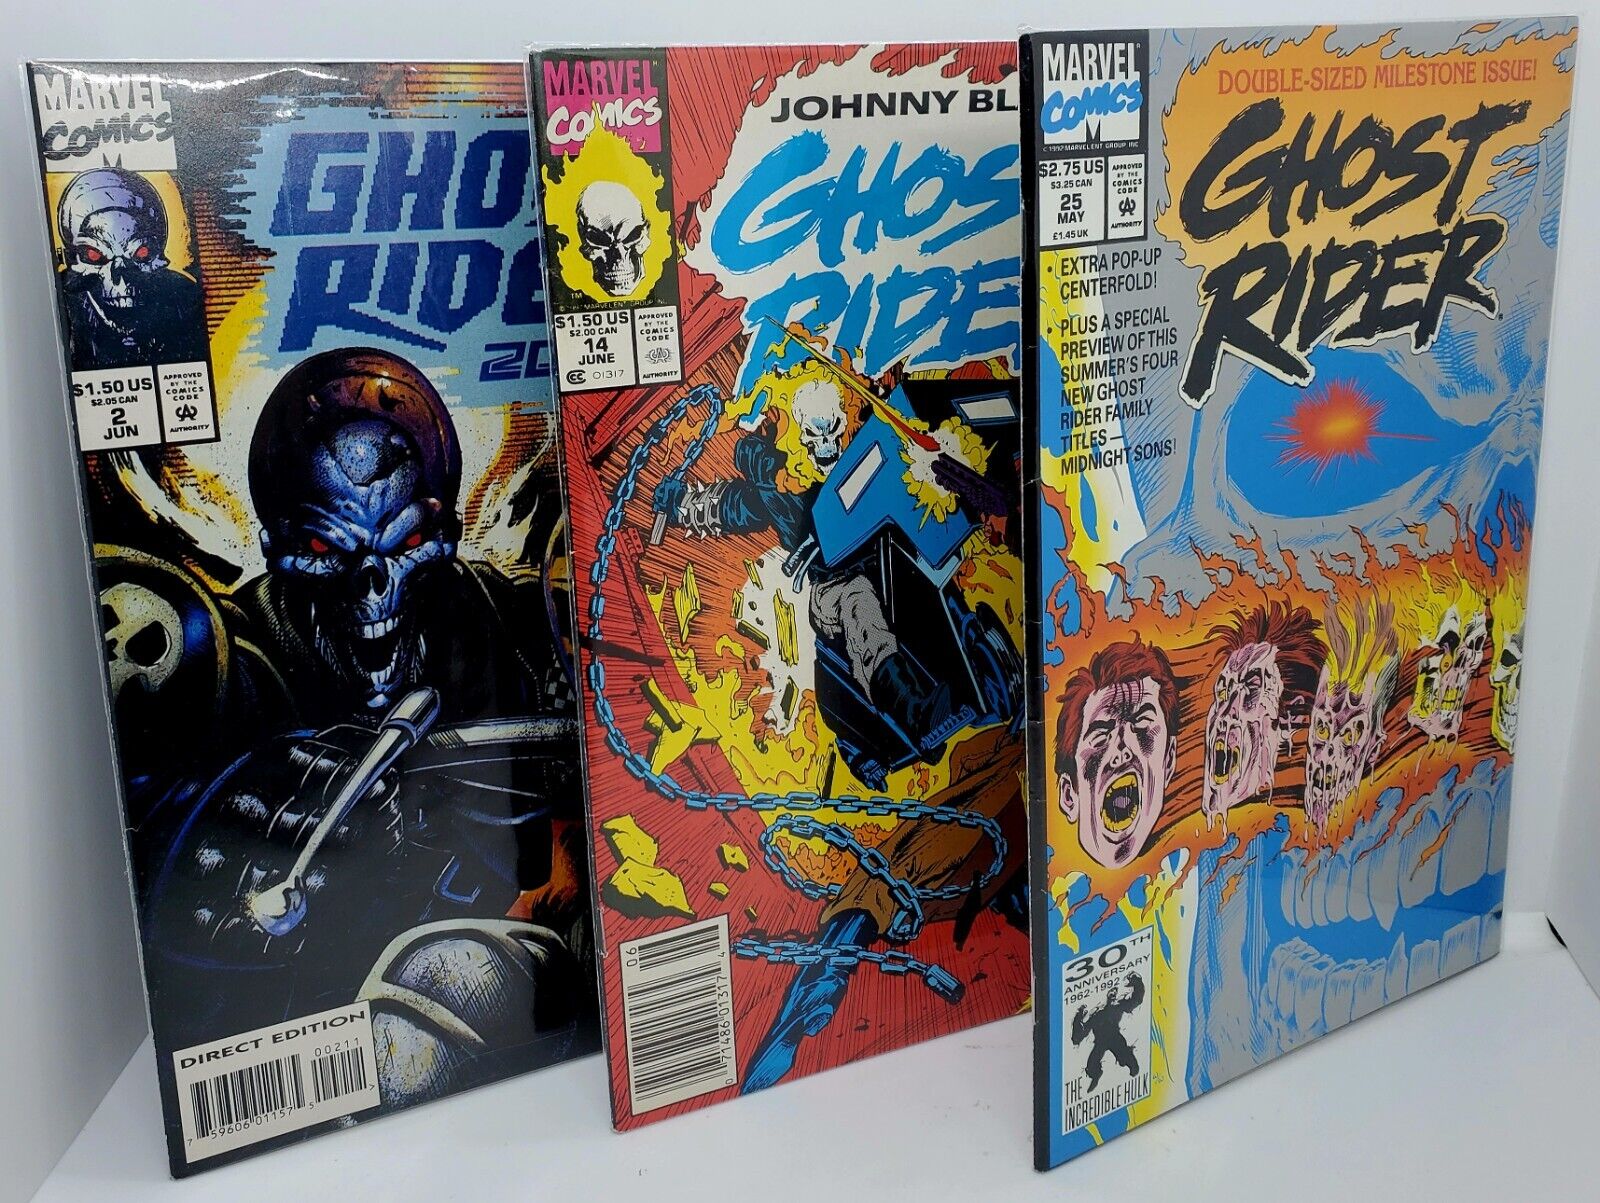 Vintage LOT of 3 Ghost Rider 2099 #2 Doubled Sized #25 #14 Marvel Comics Mint🔥